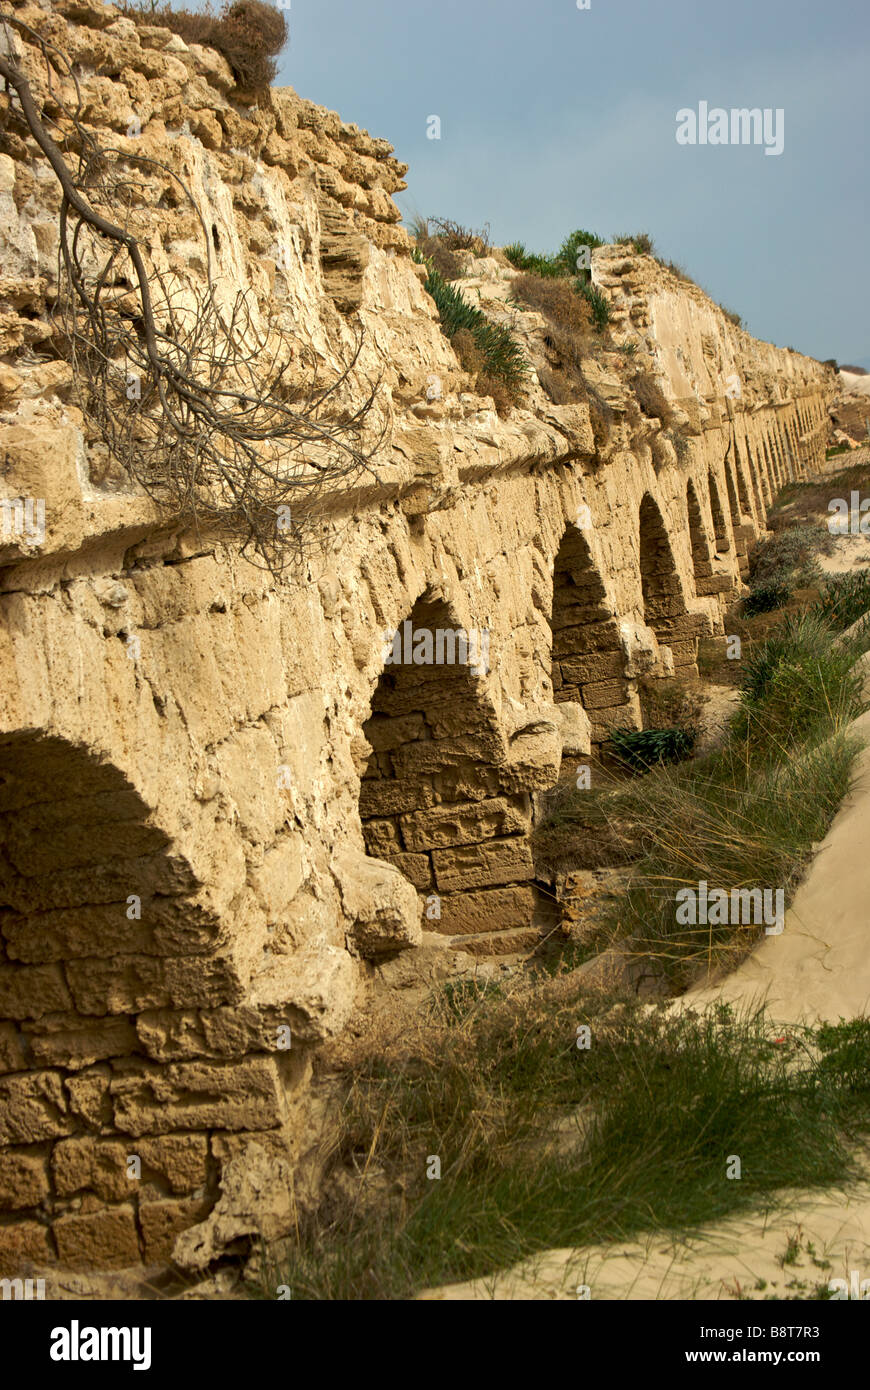 Remains of stone arch supported aqueduct that King Herod constructed to bring water from Mount Carmel to port city Caesarea Stock Photo